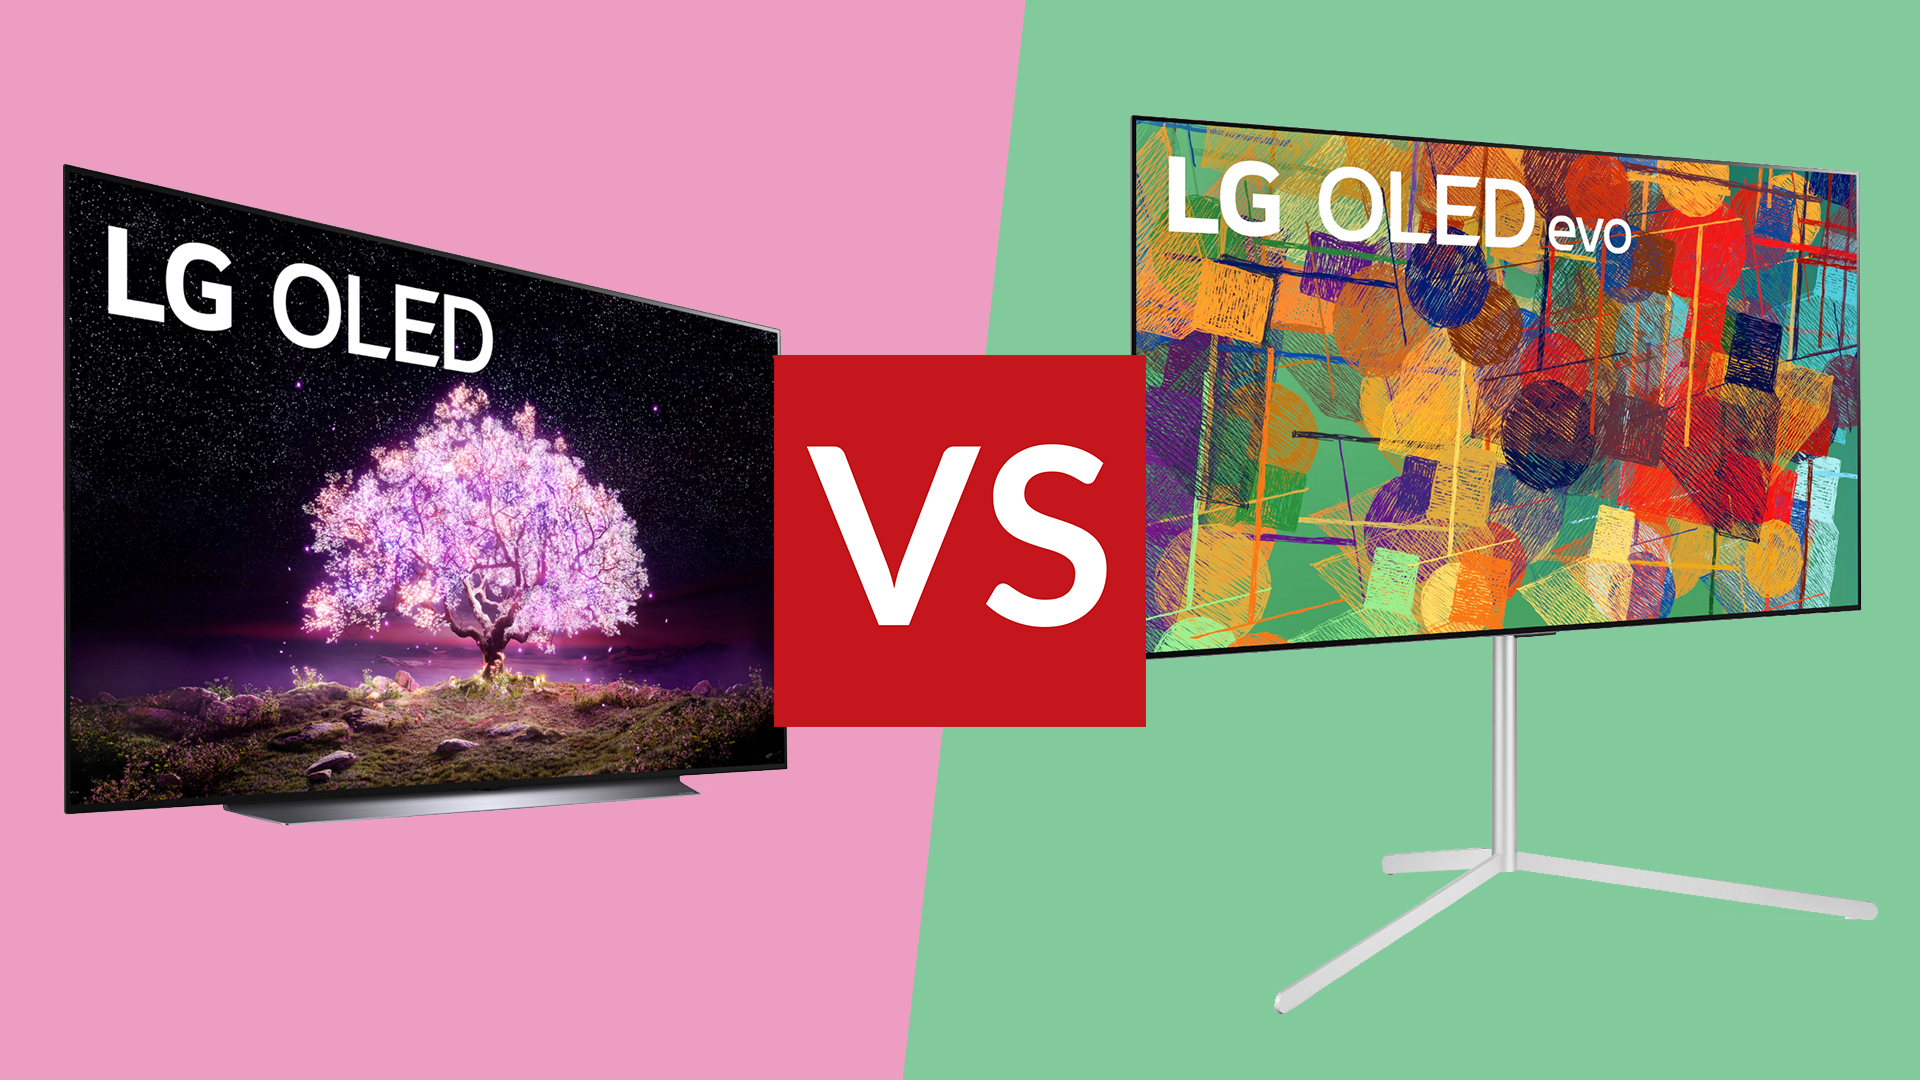 LG adds new gaming settings on this year's C1 and G1 OLED TVs